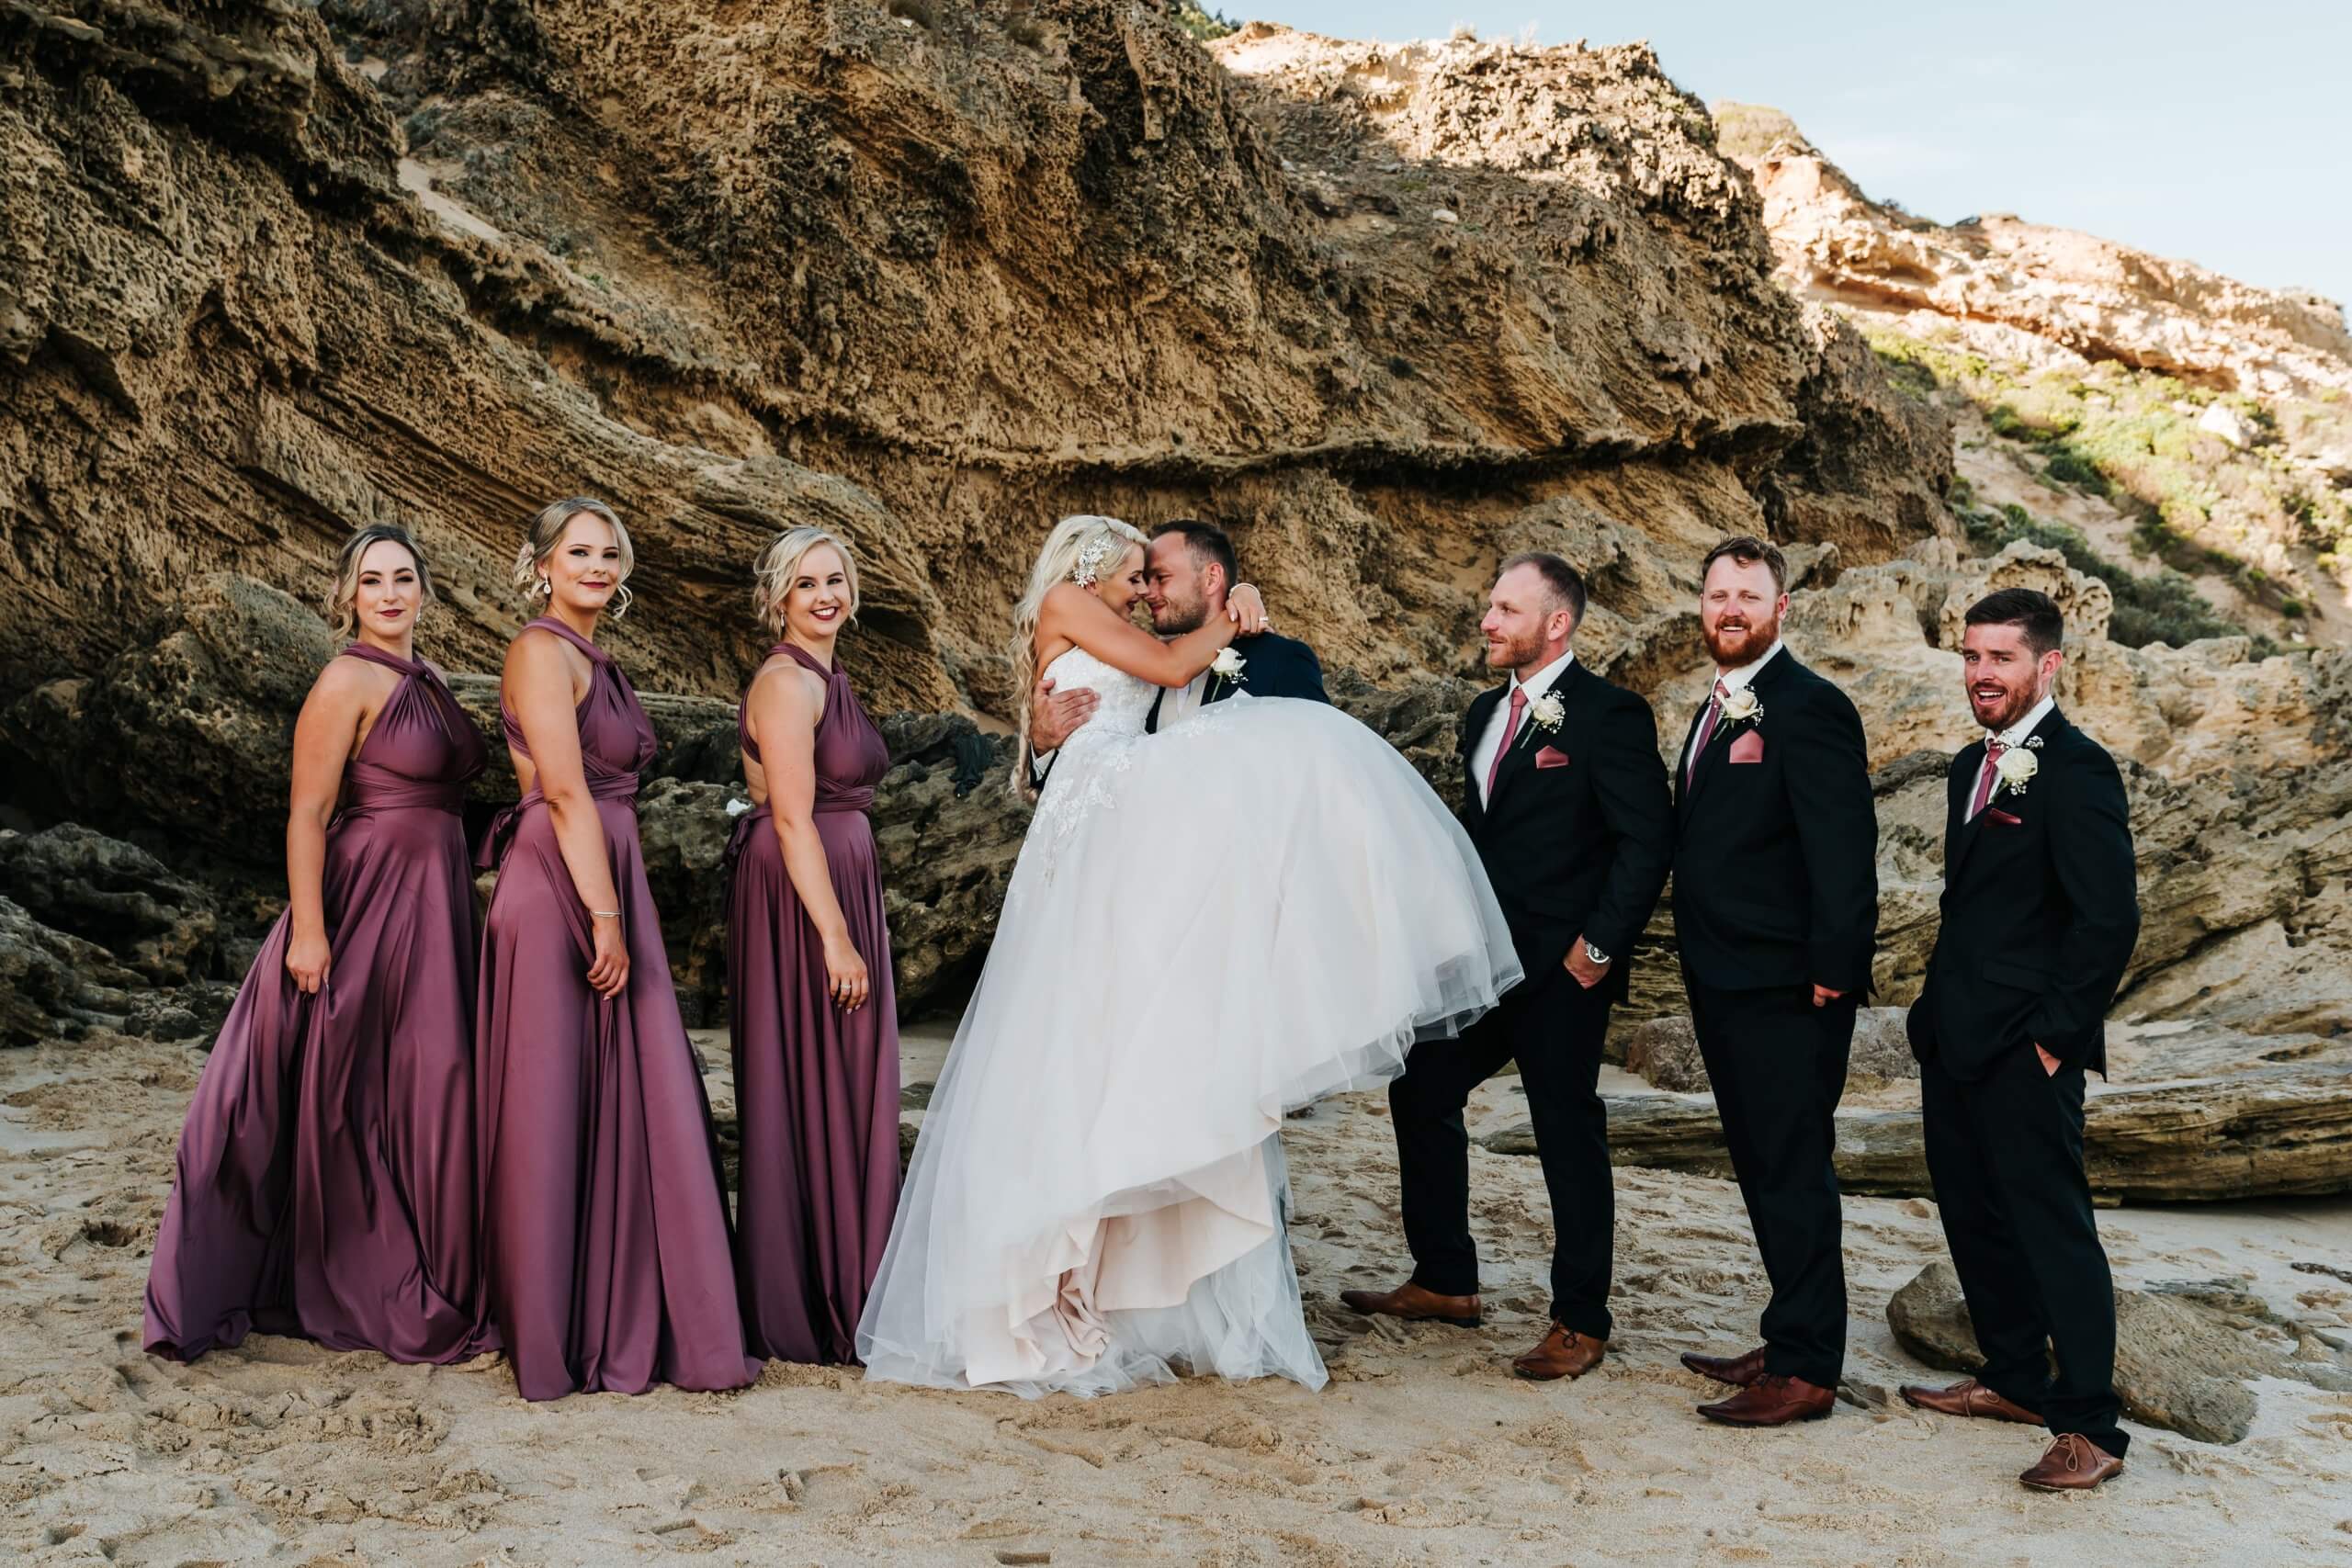 A black and purple-dressed bridal party smiling at the camera, while the groom carries the bride in bridal style.